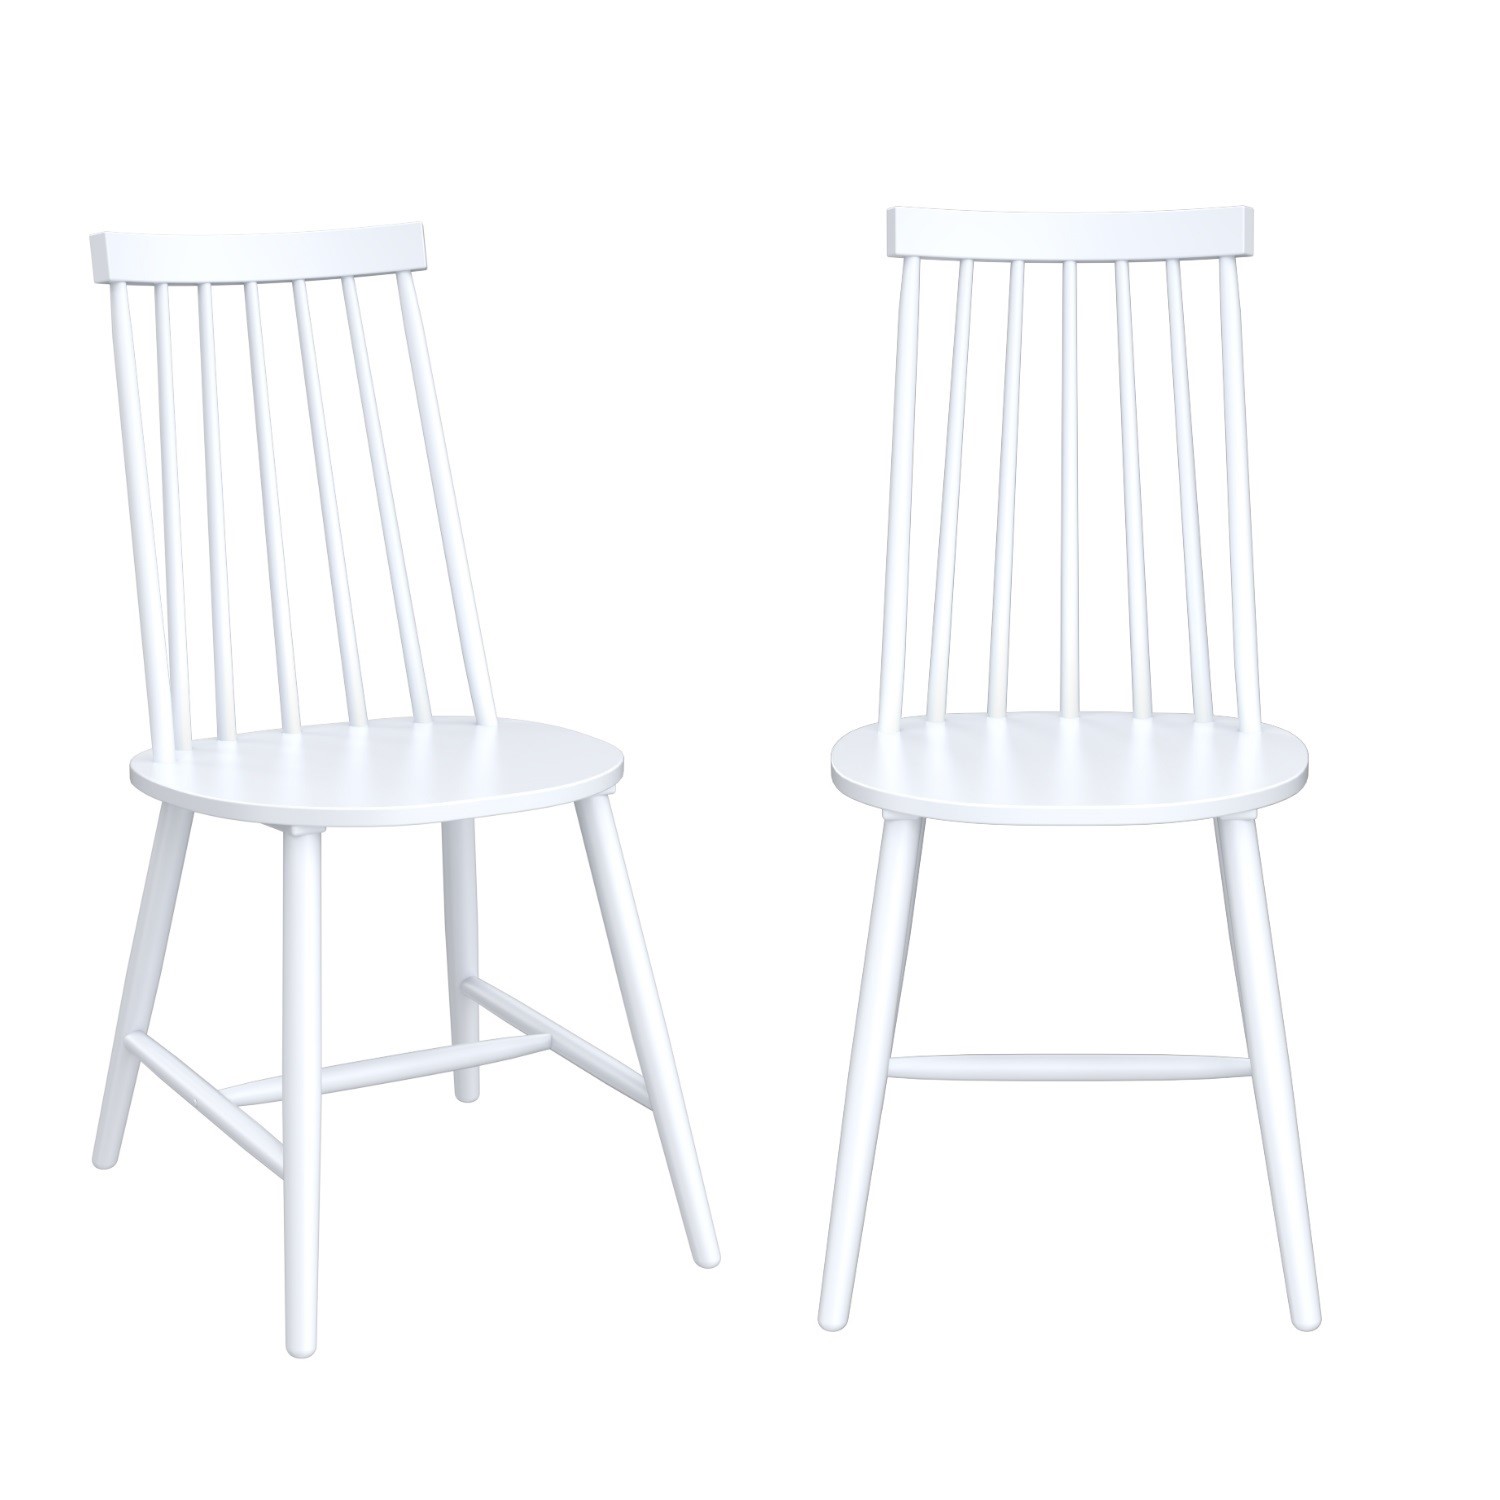 Read more about Set of 2 white wooden spindle dining chairs cami